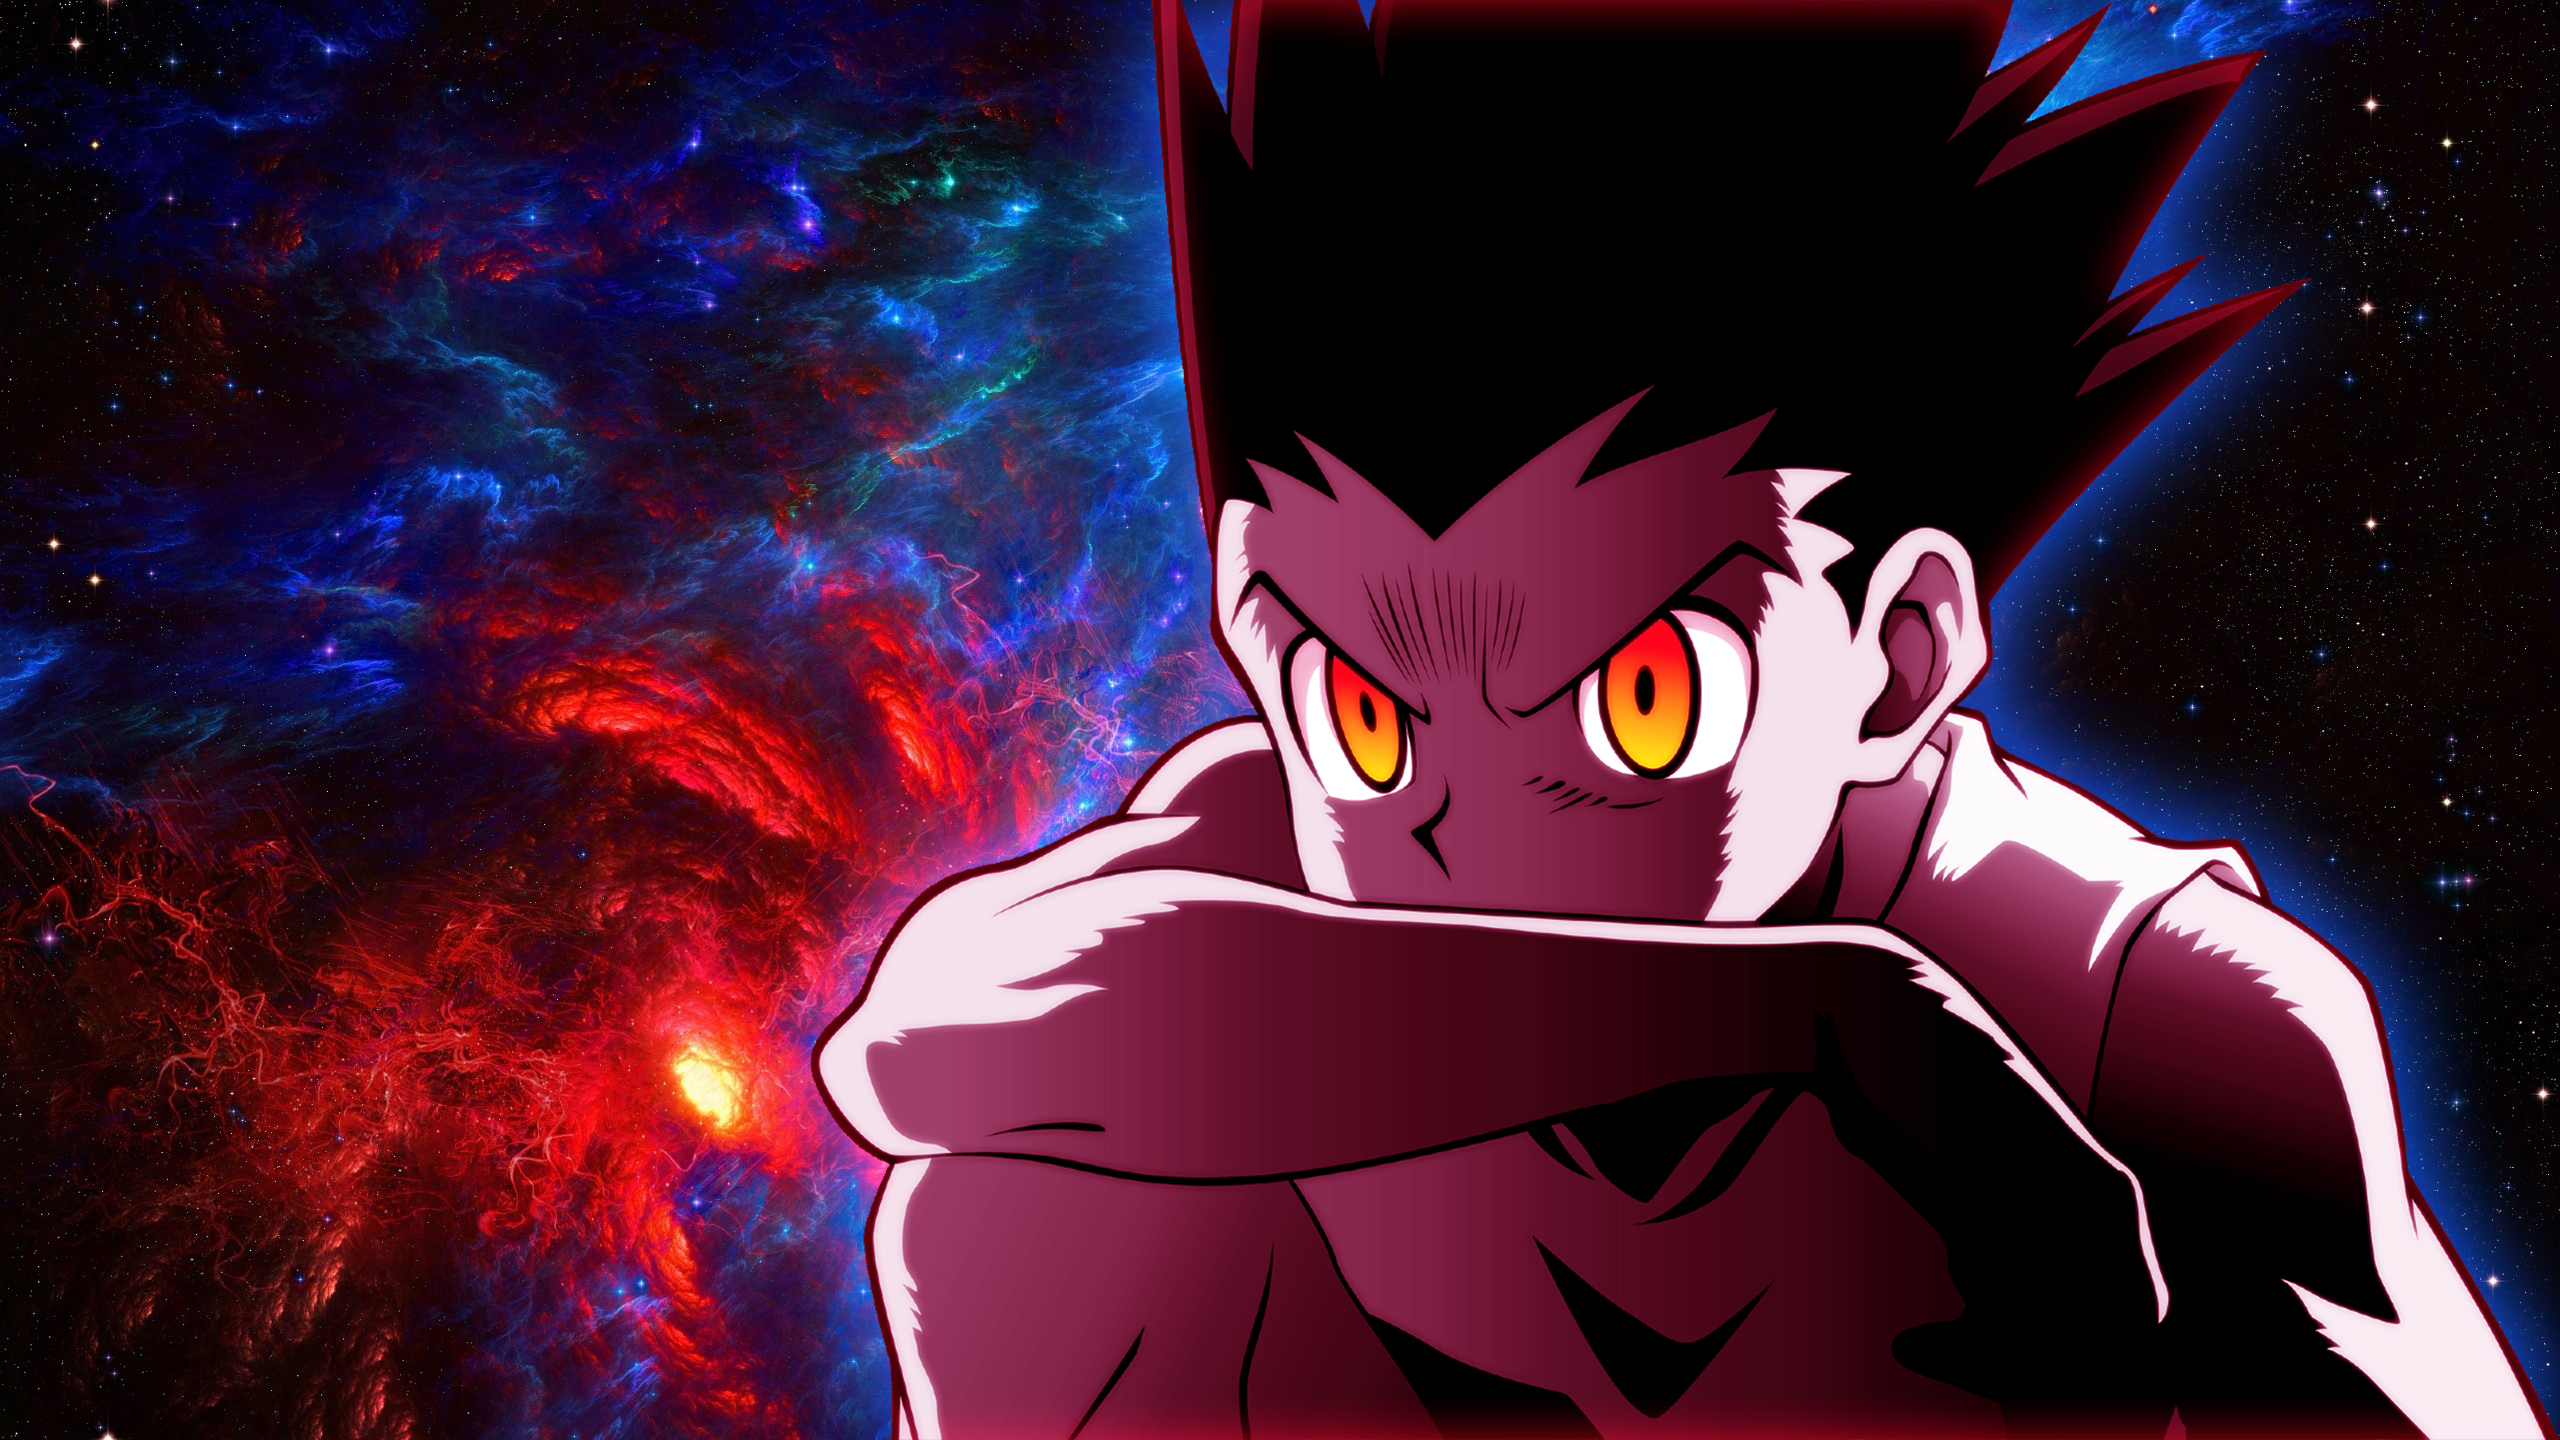 Anime 2560x1440 Hunter x Hunter Gon Freecss anime games space clouds